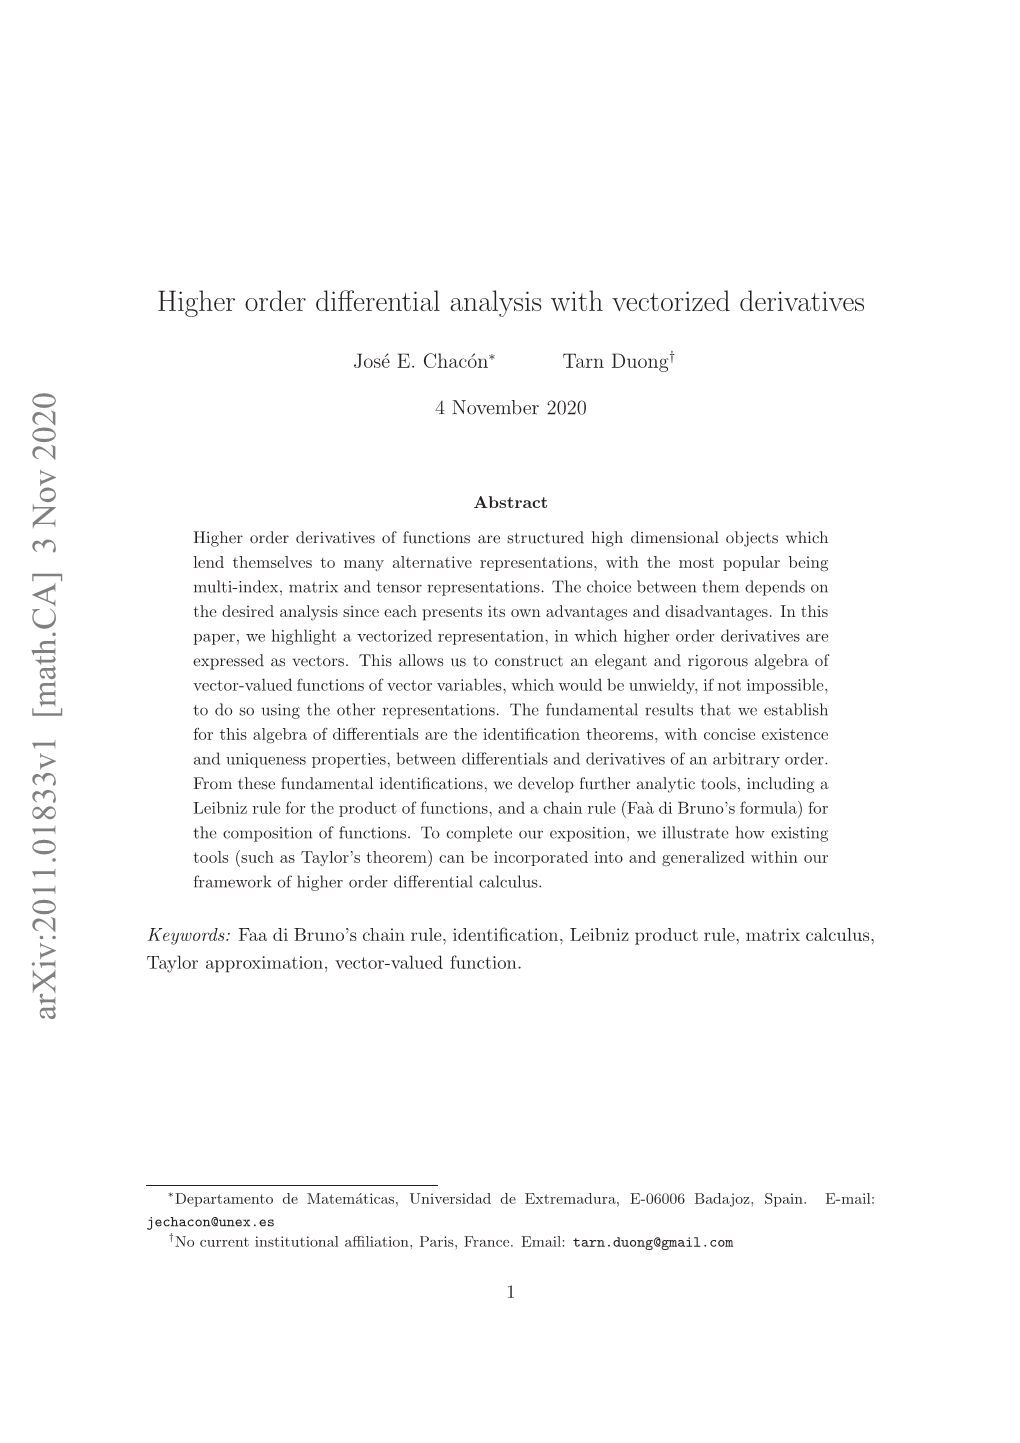 Higher Order Differential Analysis with Vectorized Derivatives